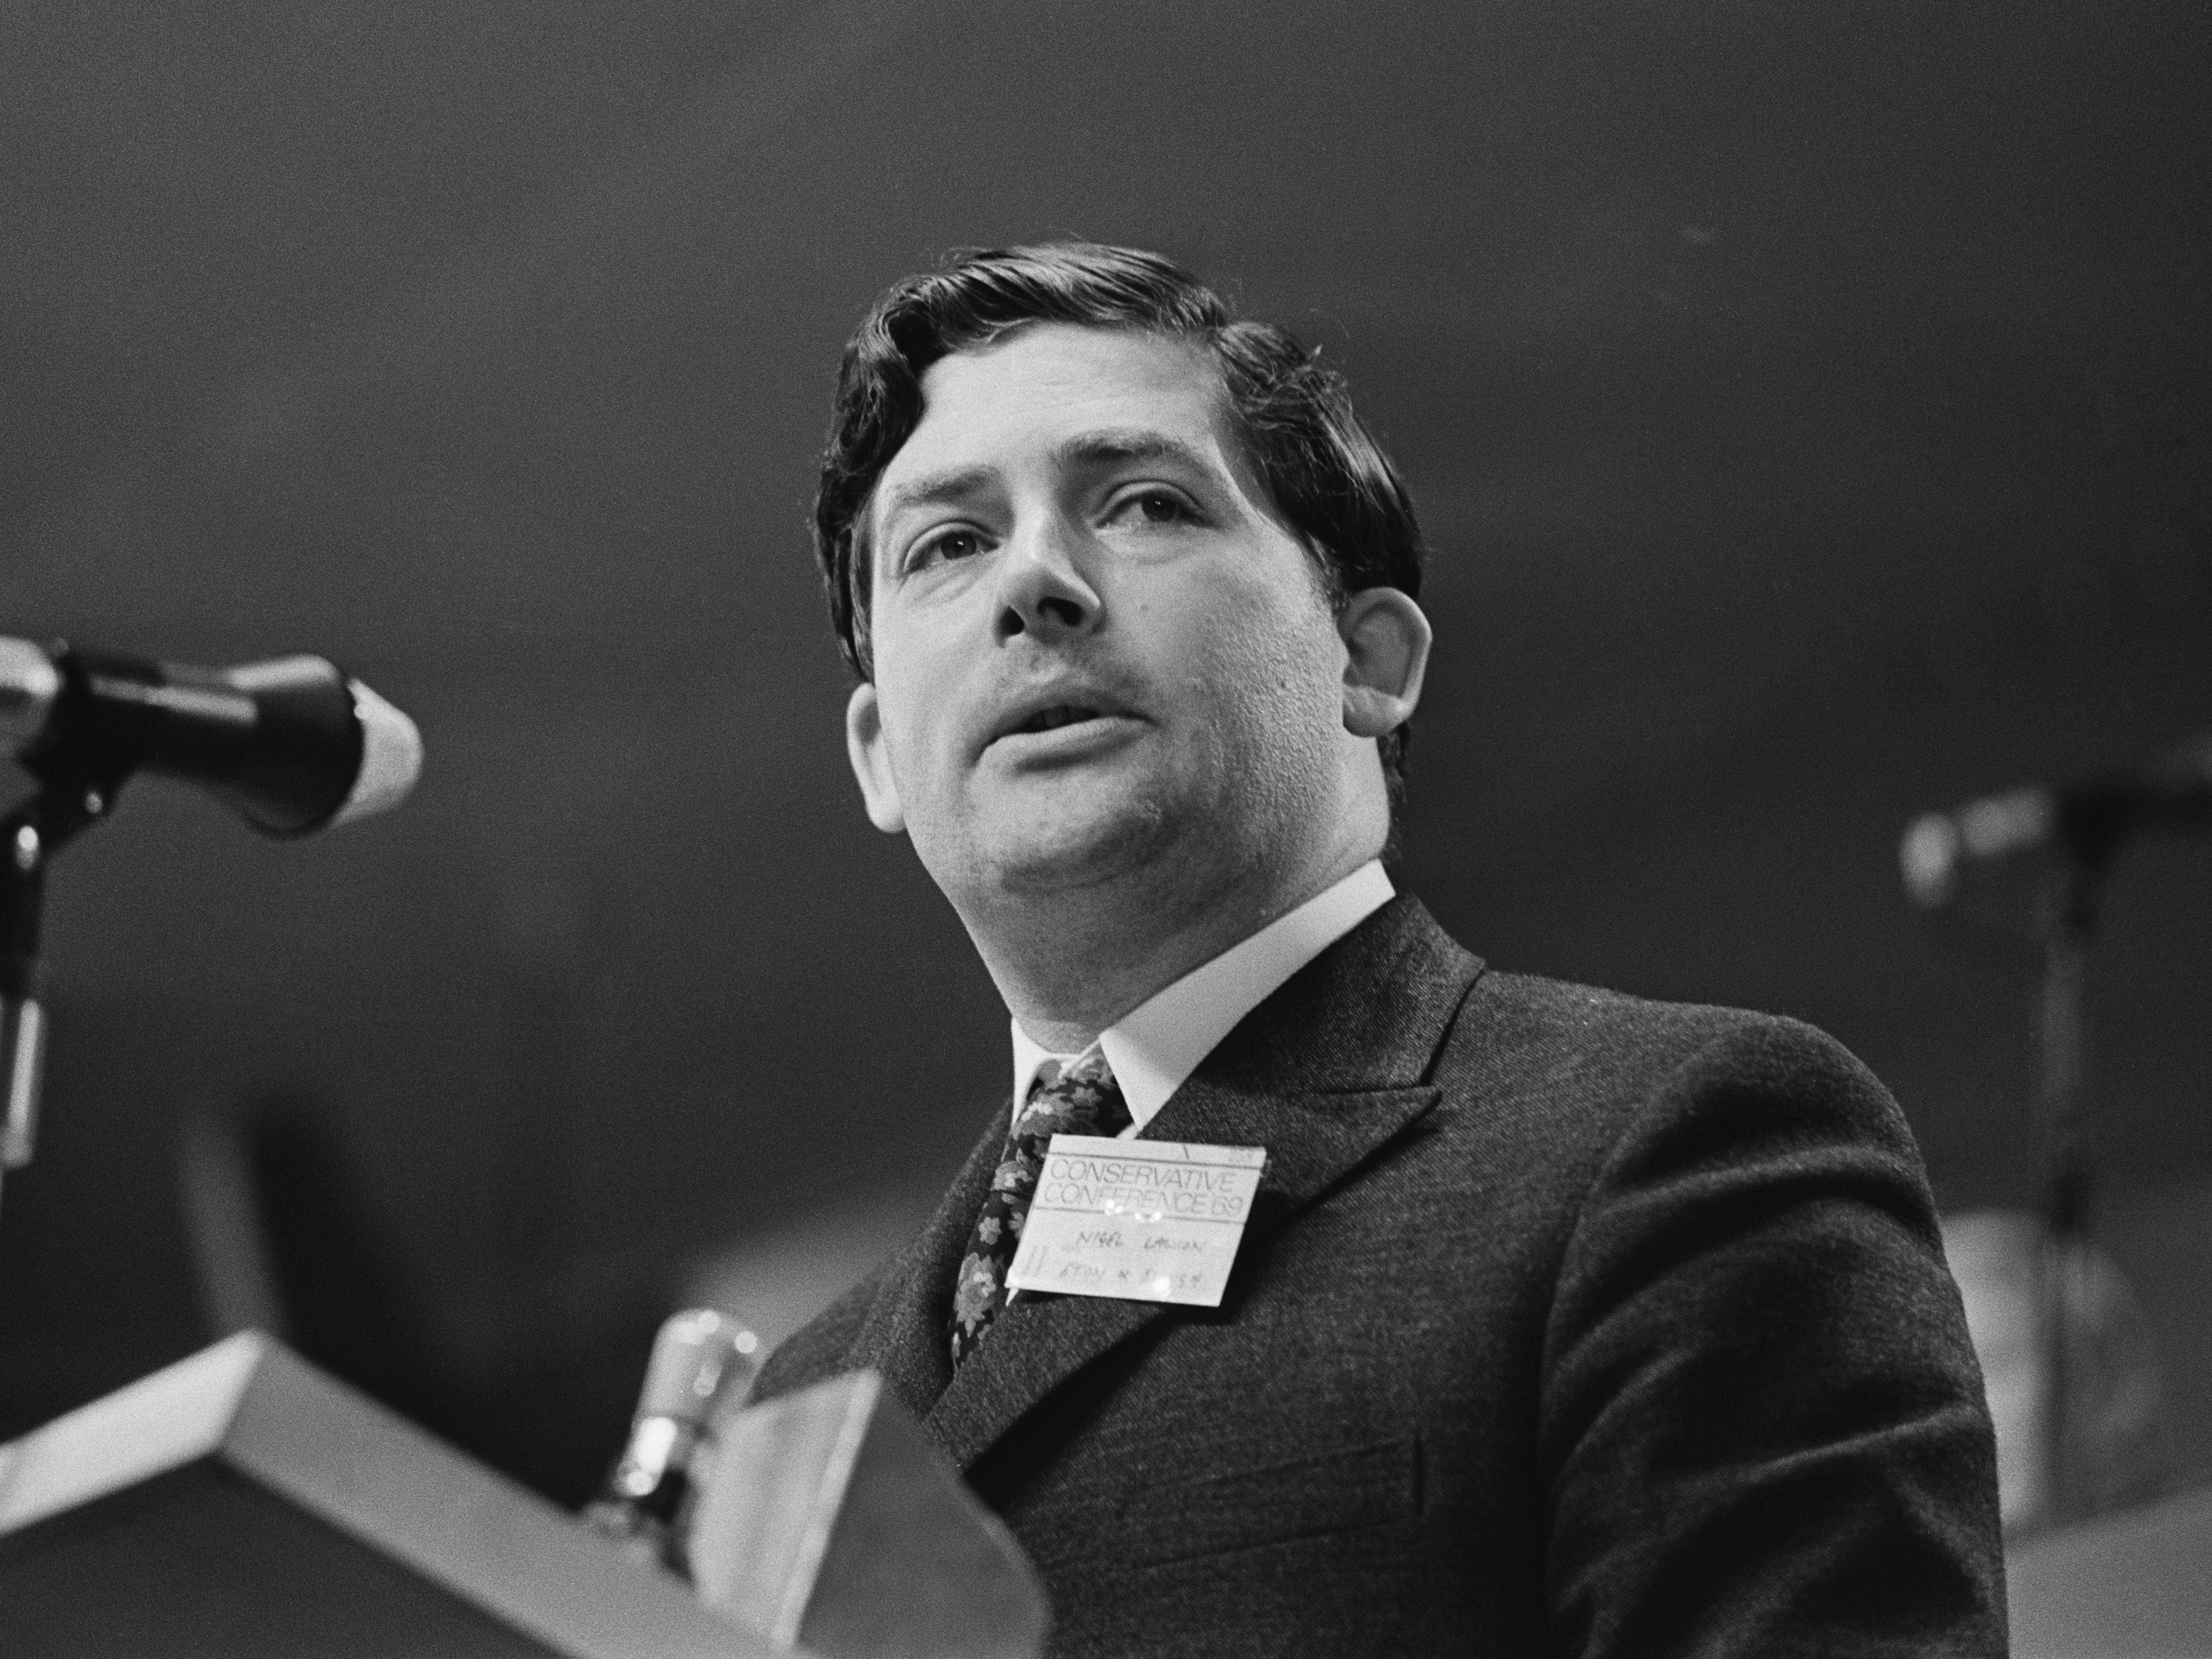 Lawson at the Conservative Party Conference in Brighton in October 1969